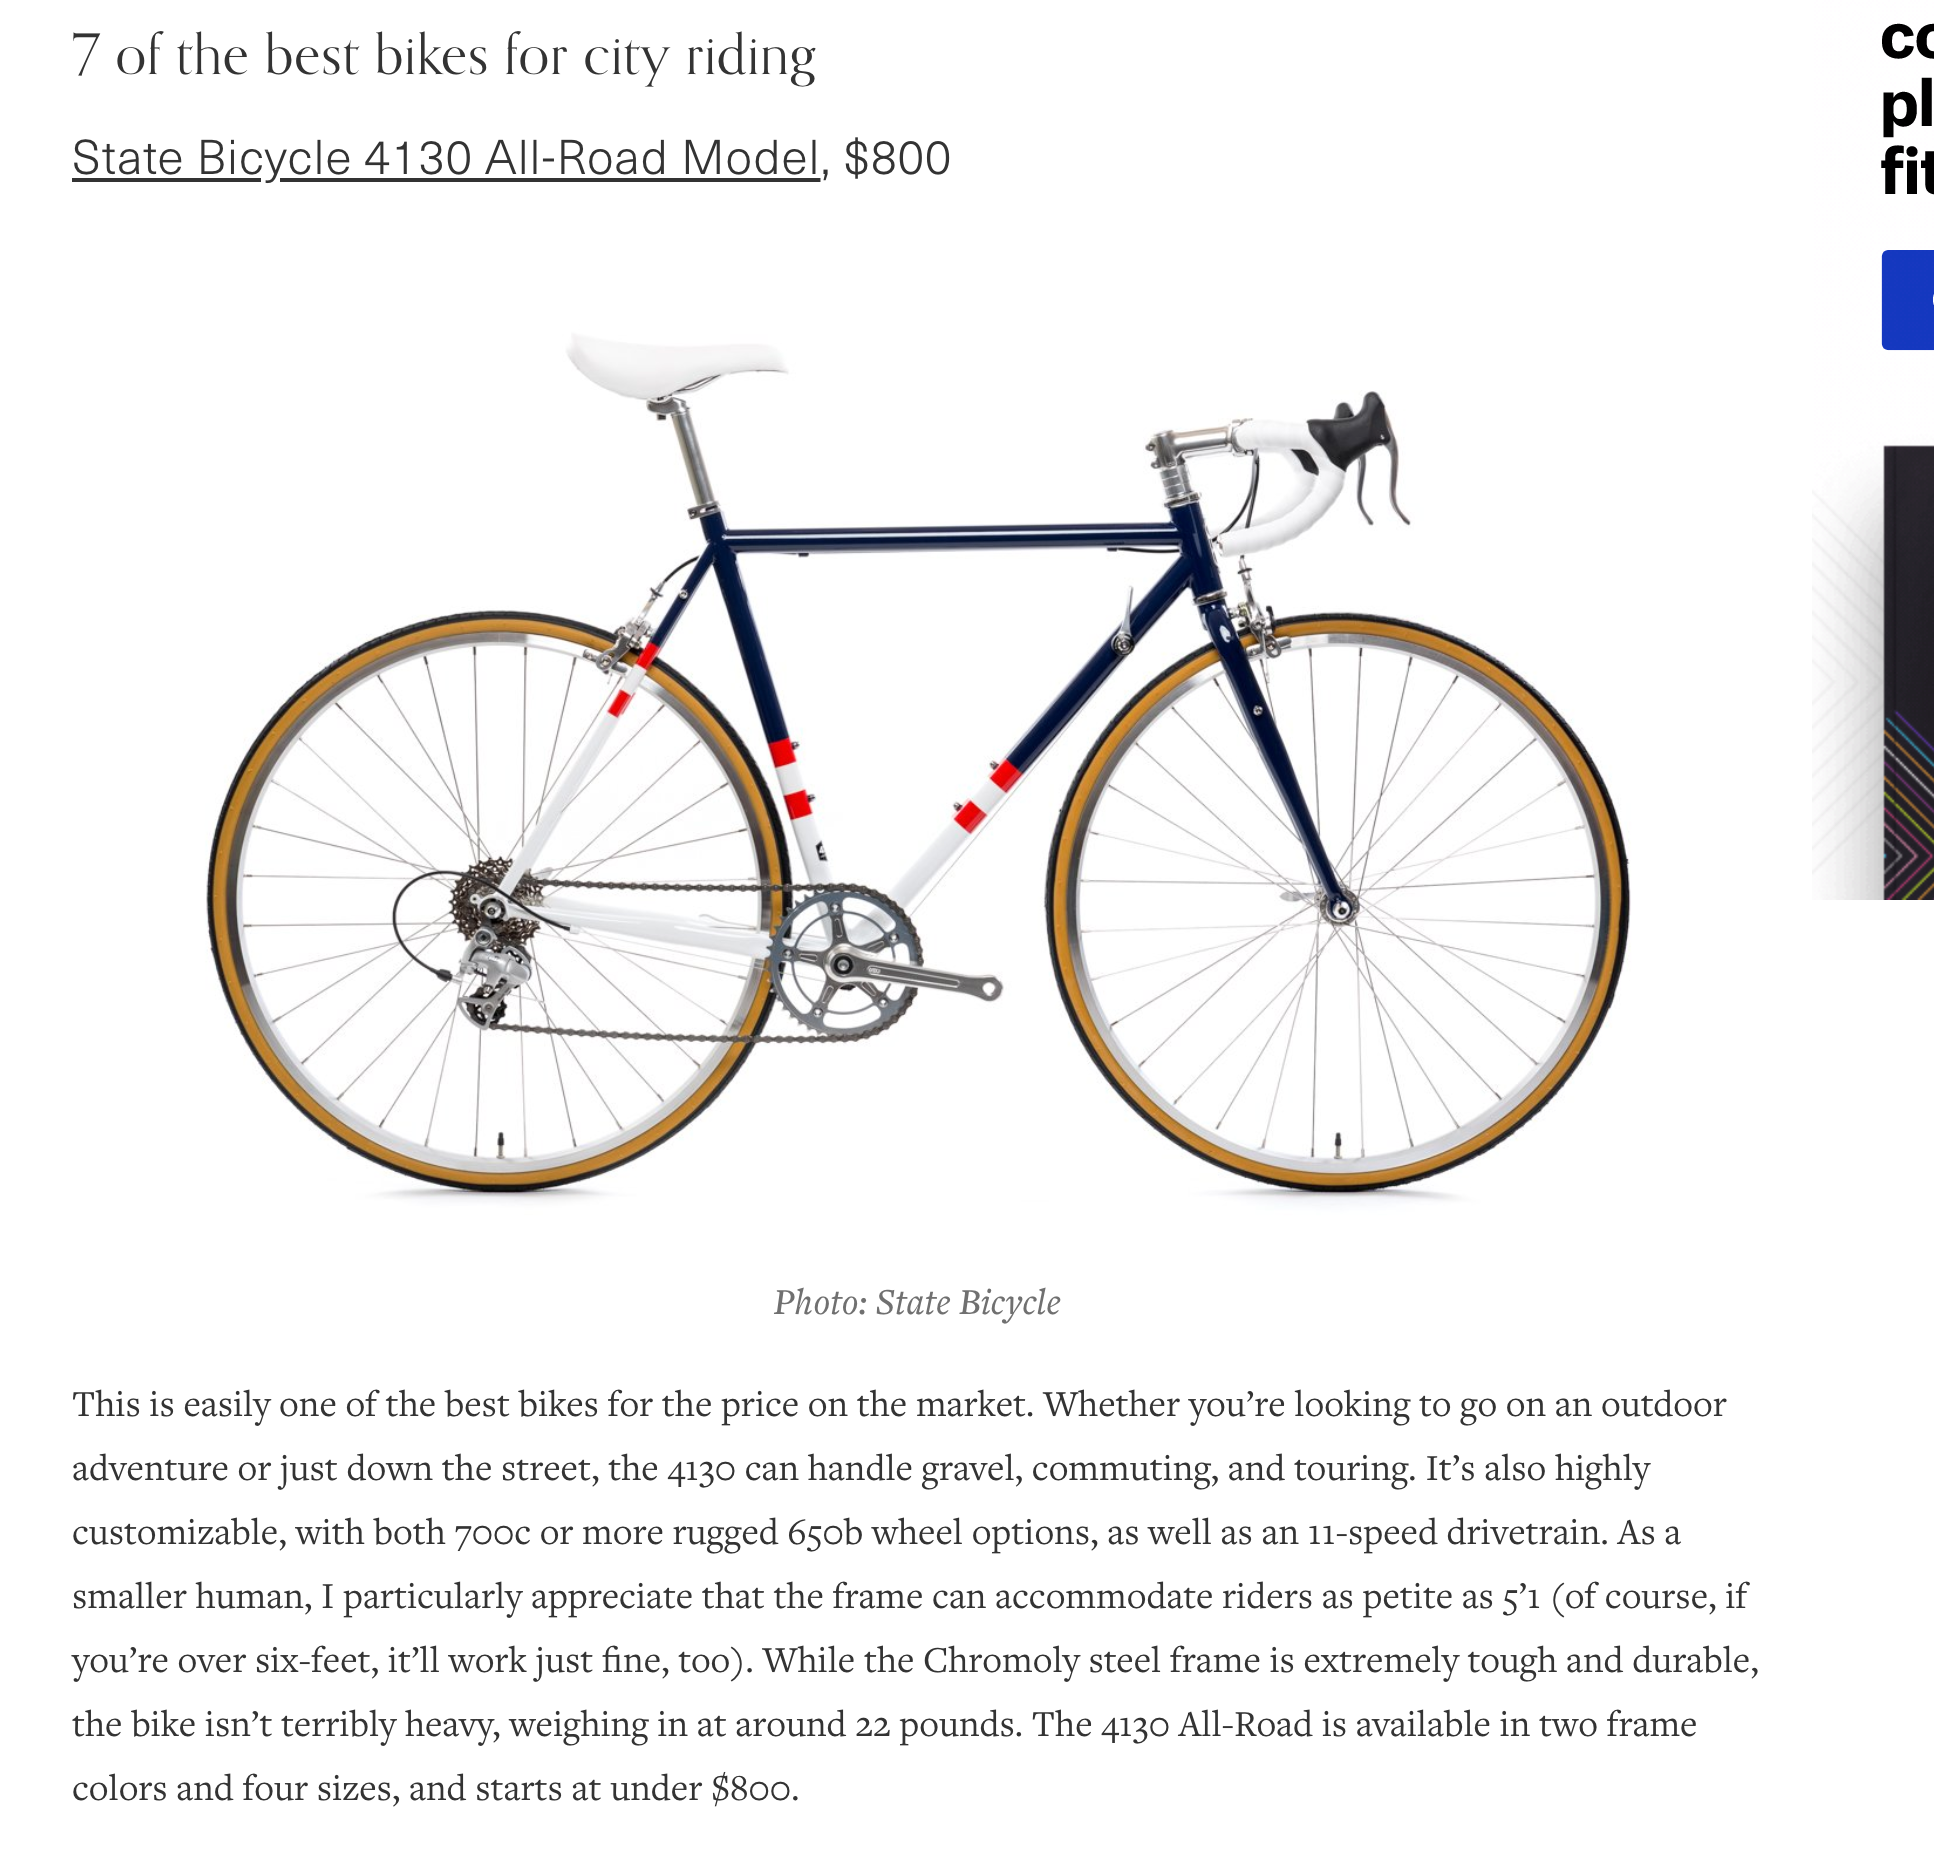 Well+Good : 7 of the Best Bikes for City Riding That Make for a Healthy Commute